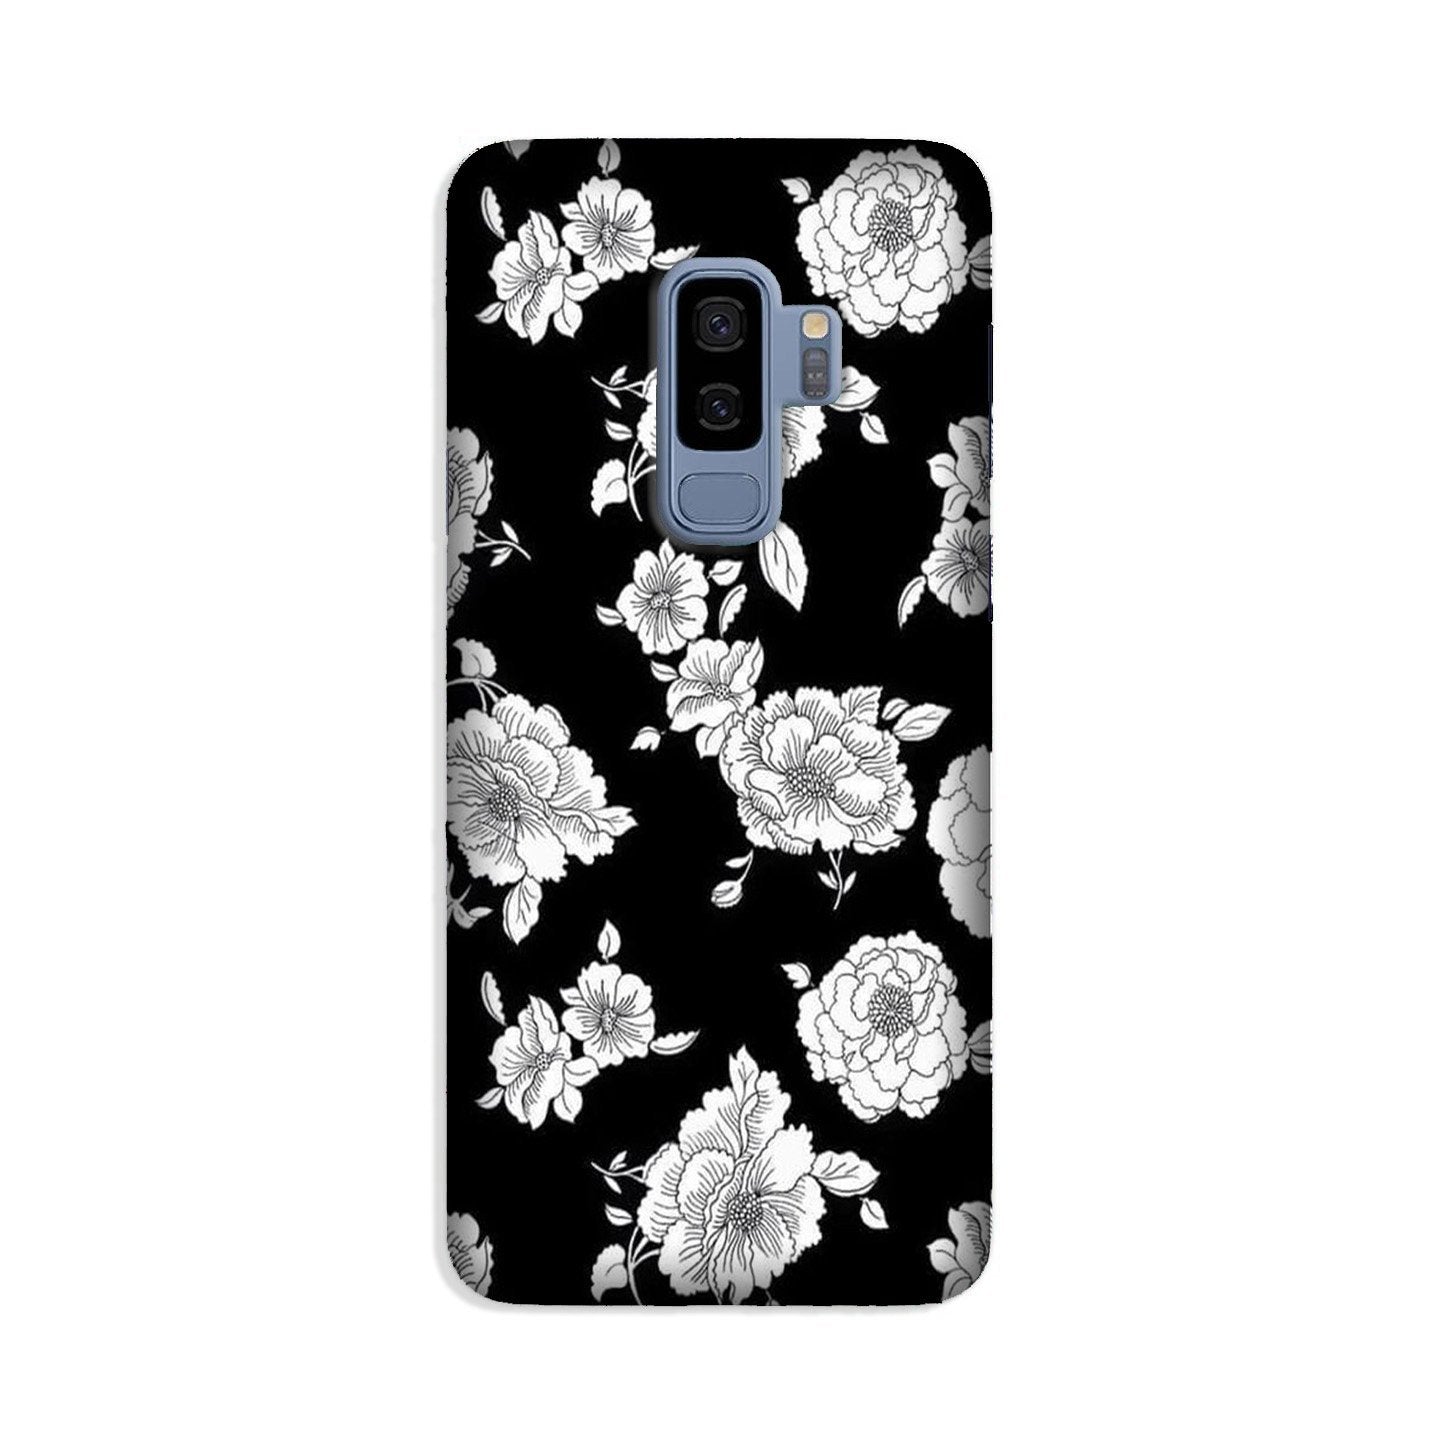 White flowers Black Background Case for Galaxy S9 Plus